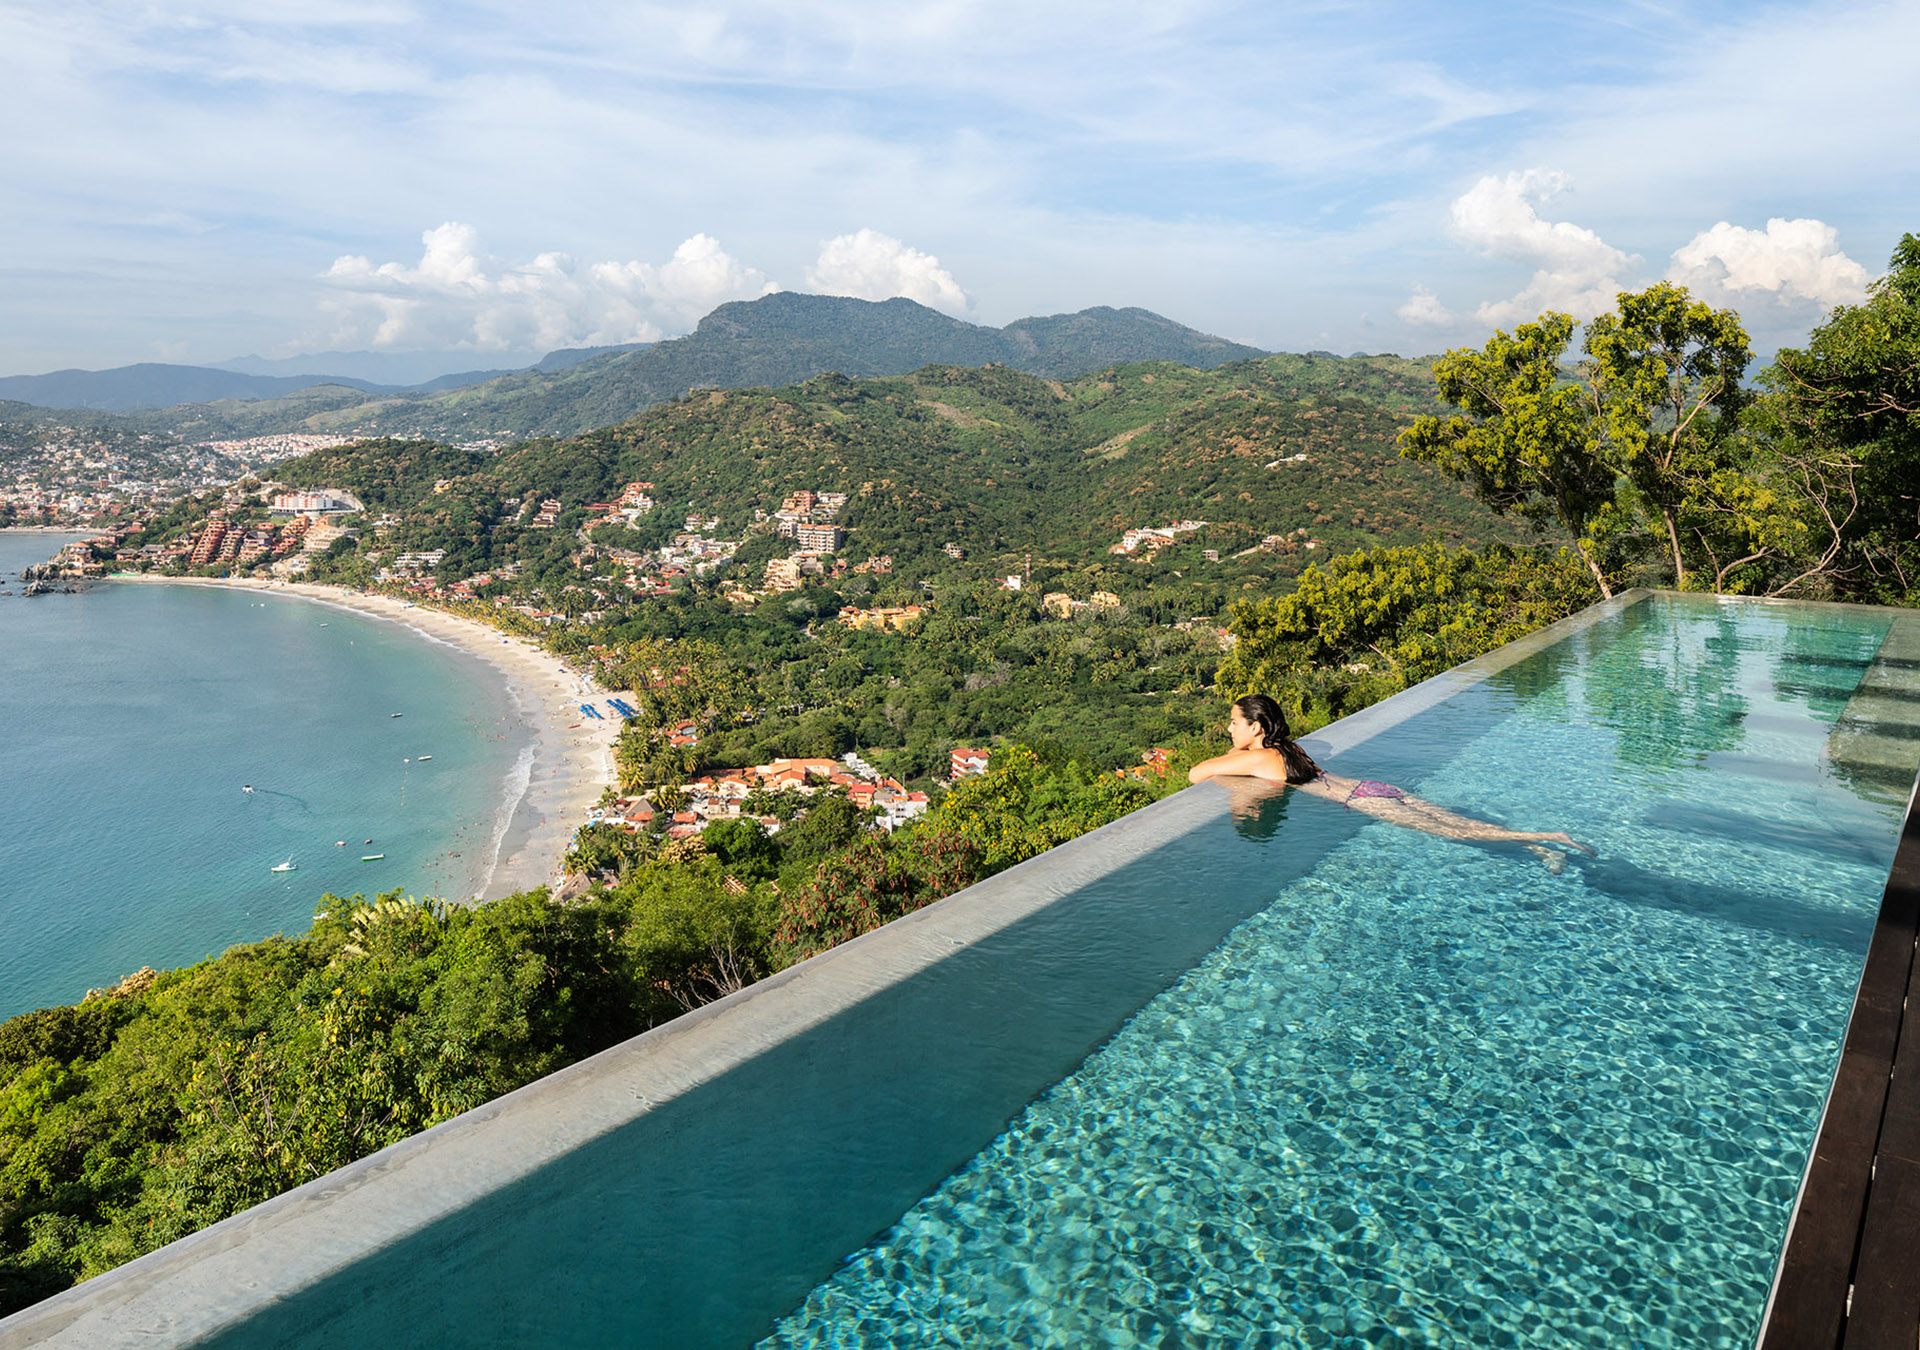 Situated on one of the highest hills in Zihuatanejo, Casa Z opens out into the landscape while soaring in the air